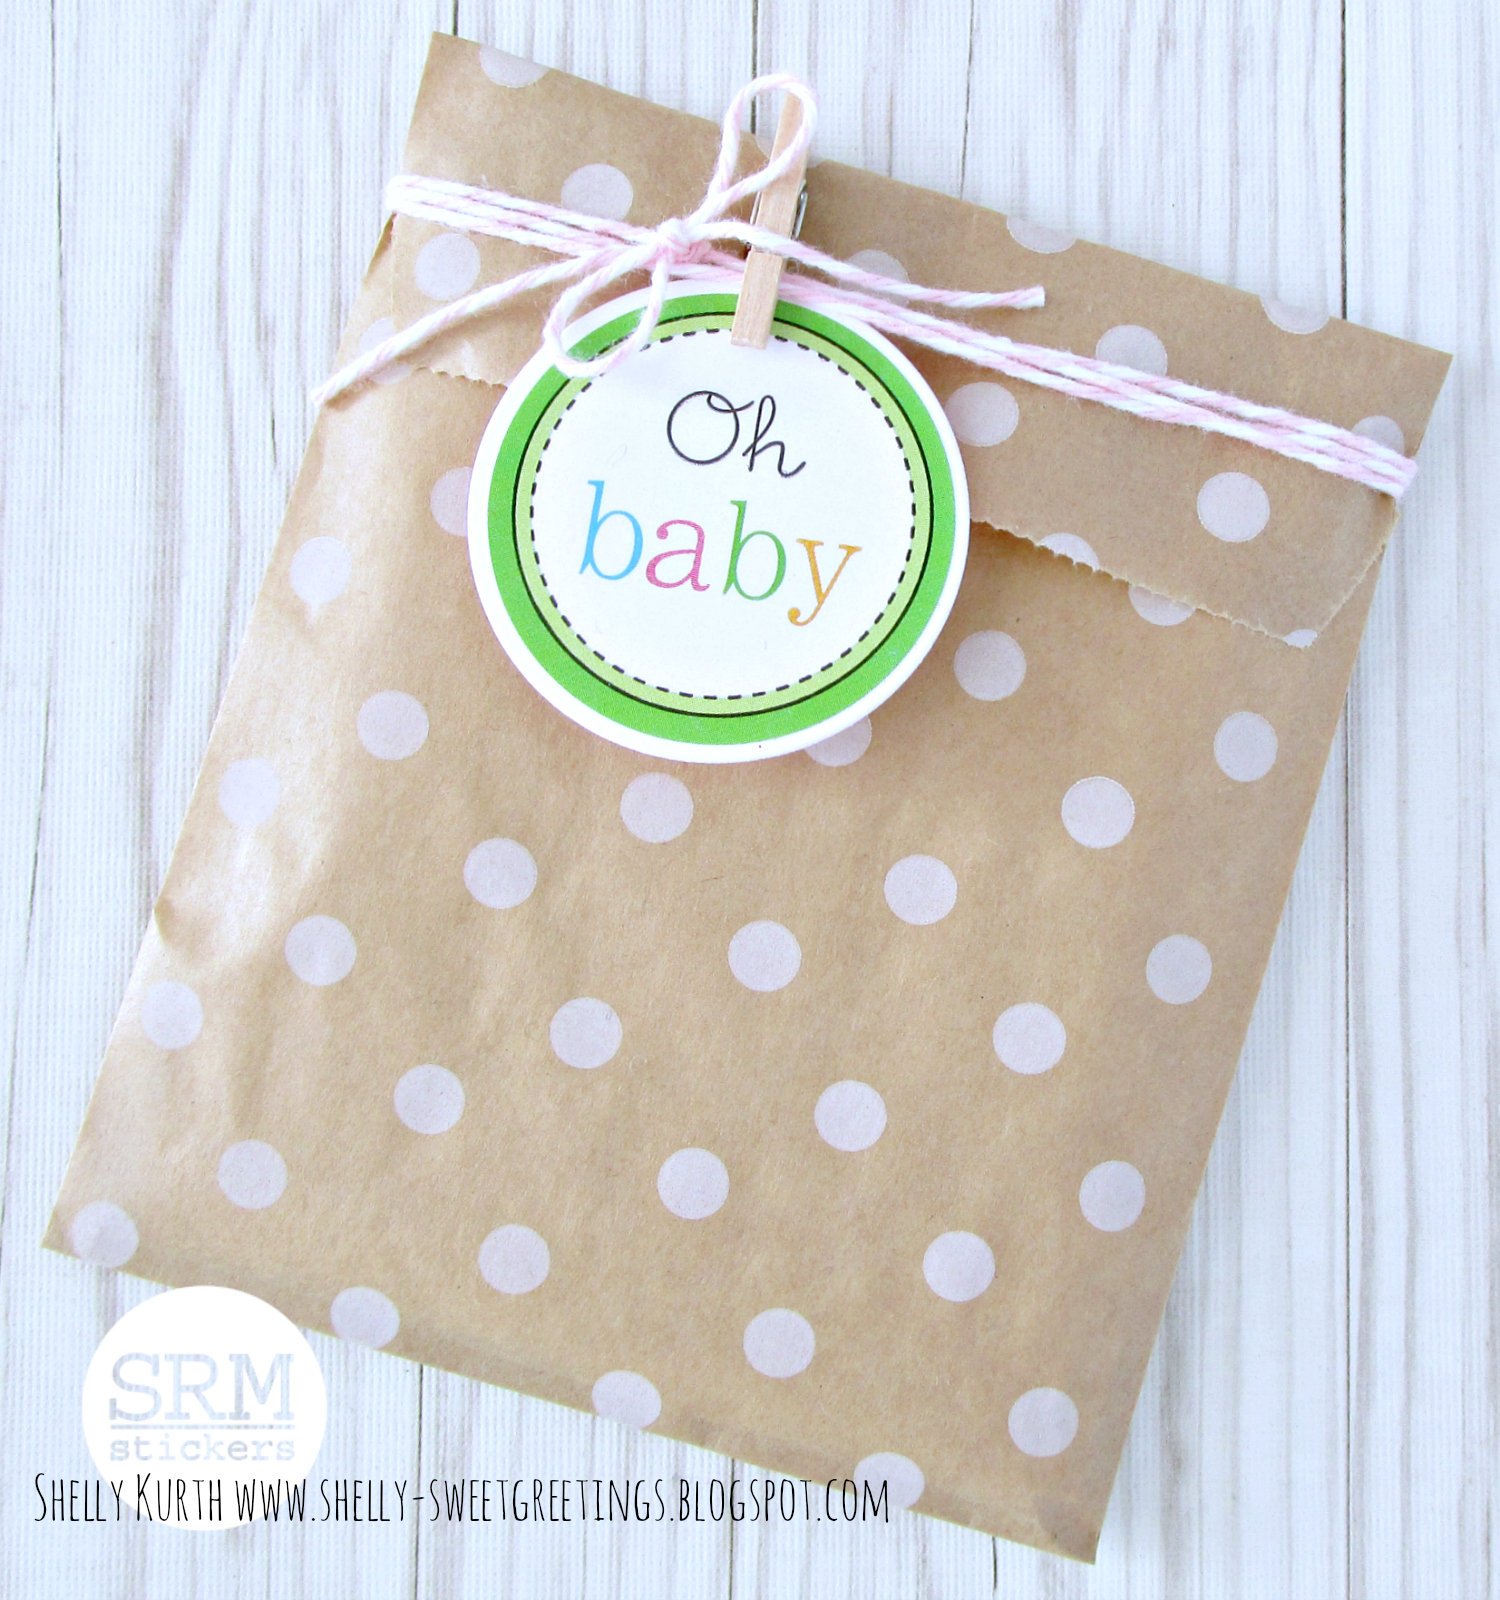 SRM Stickers: Oh Baby Gift Bags by Shelly